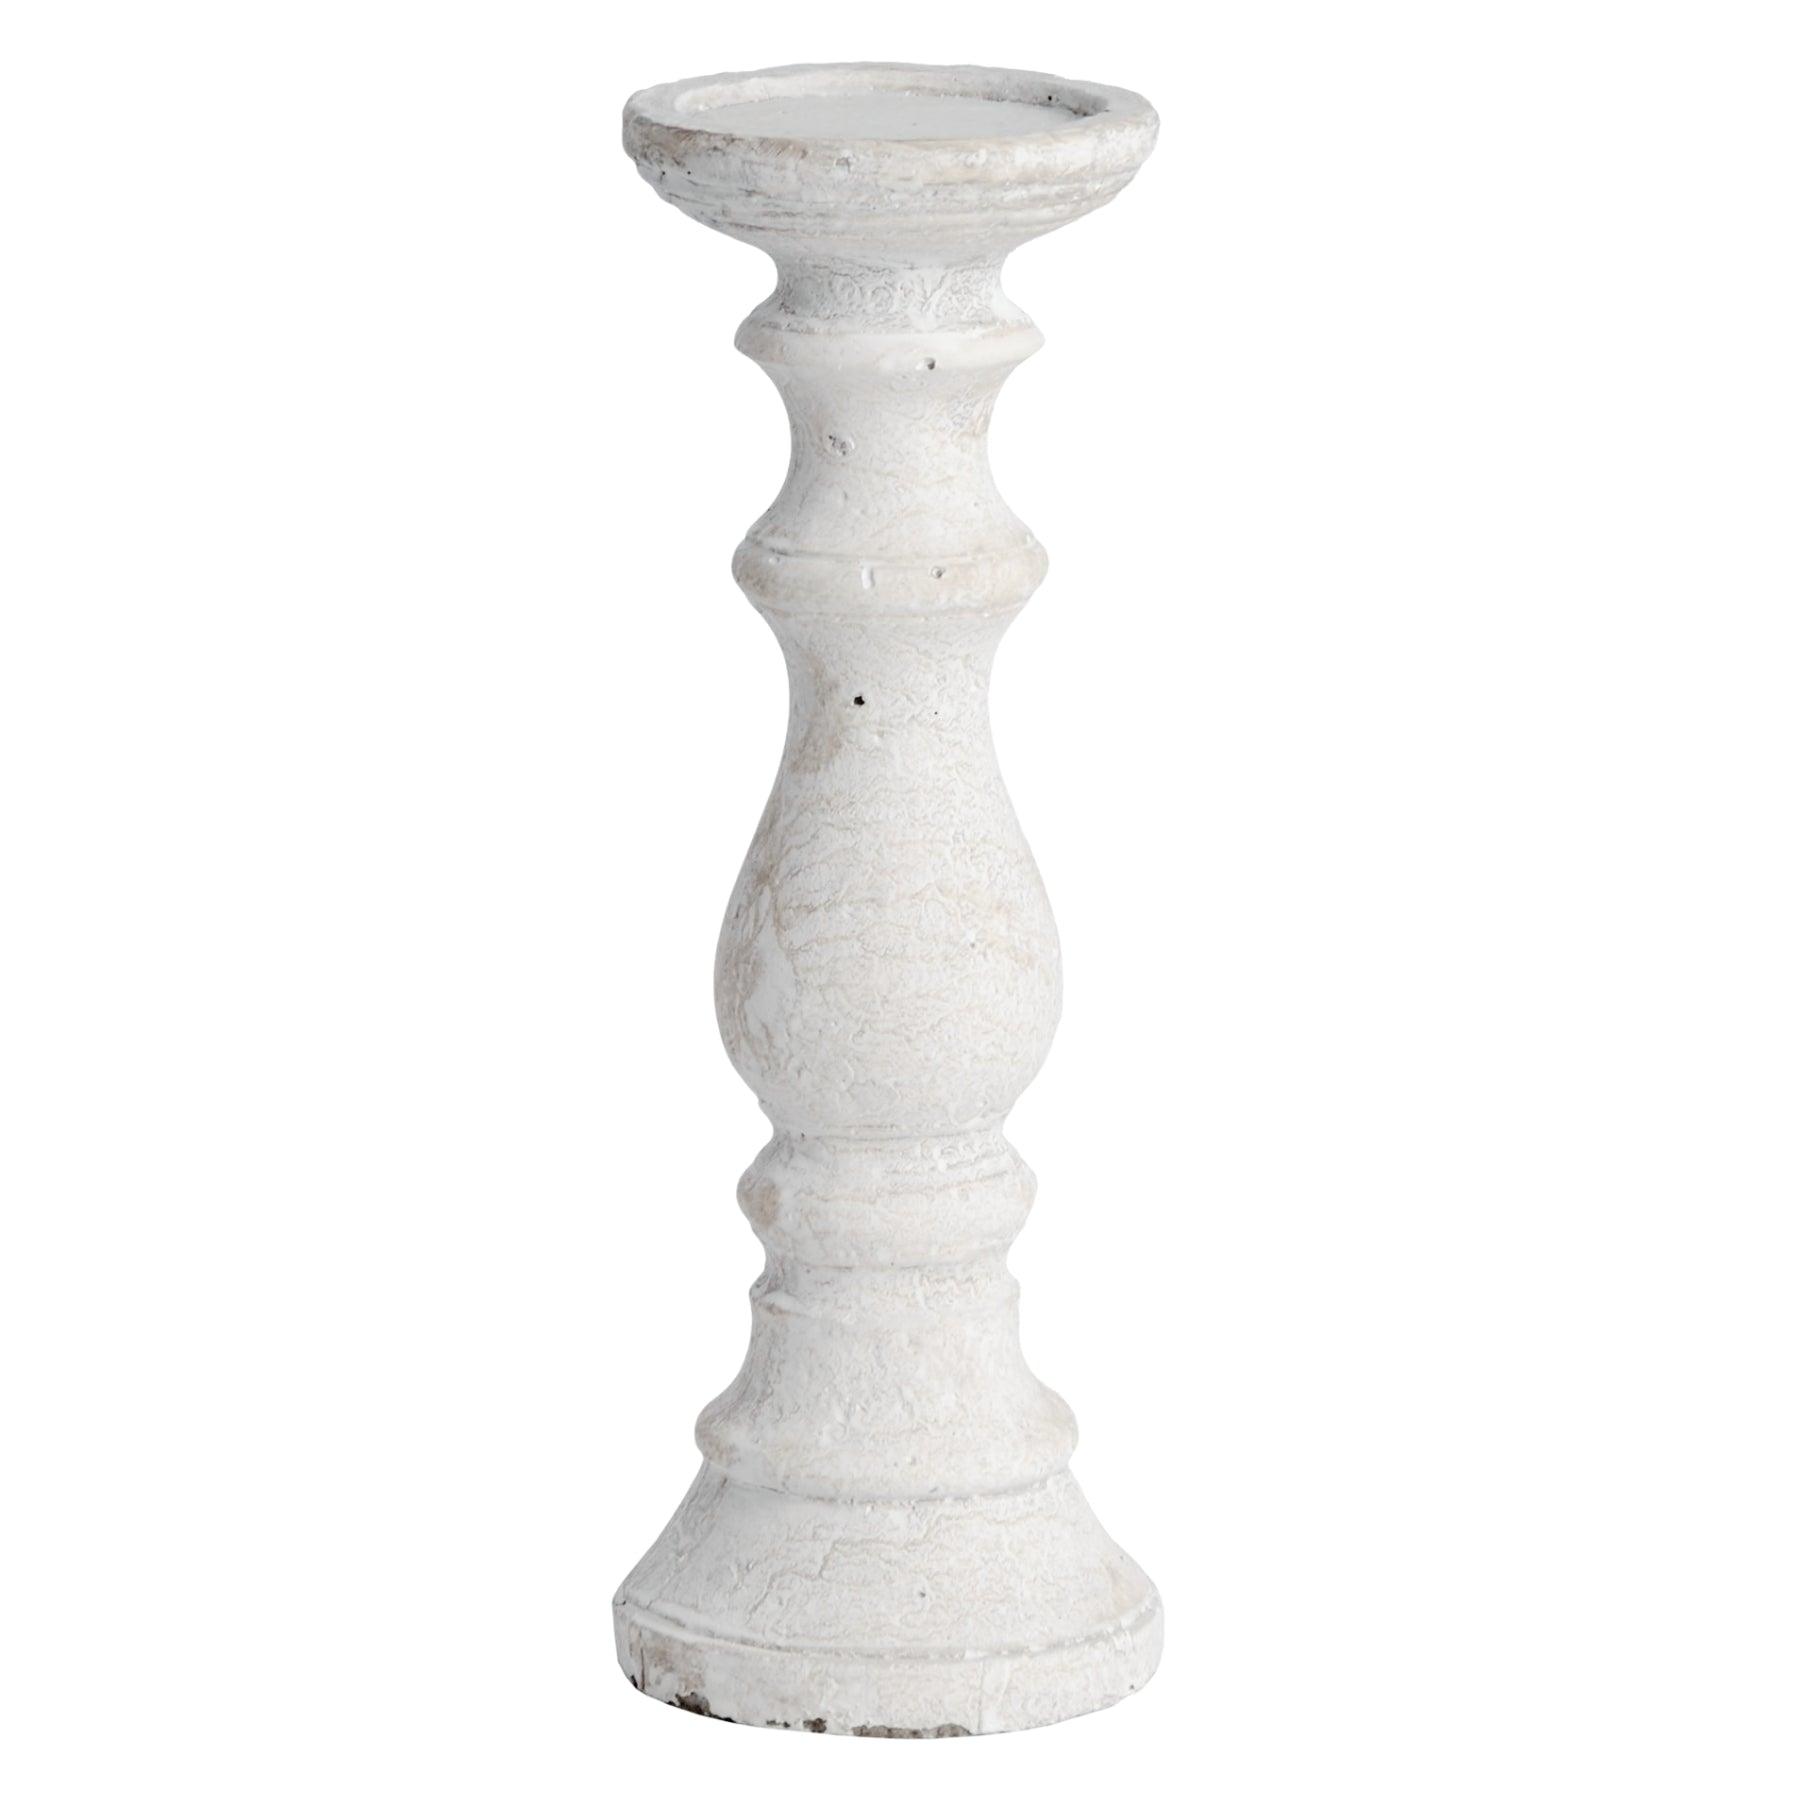 View Medium Stone Candle Holder information